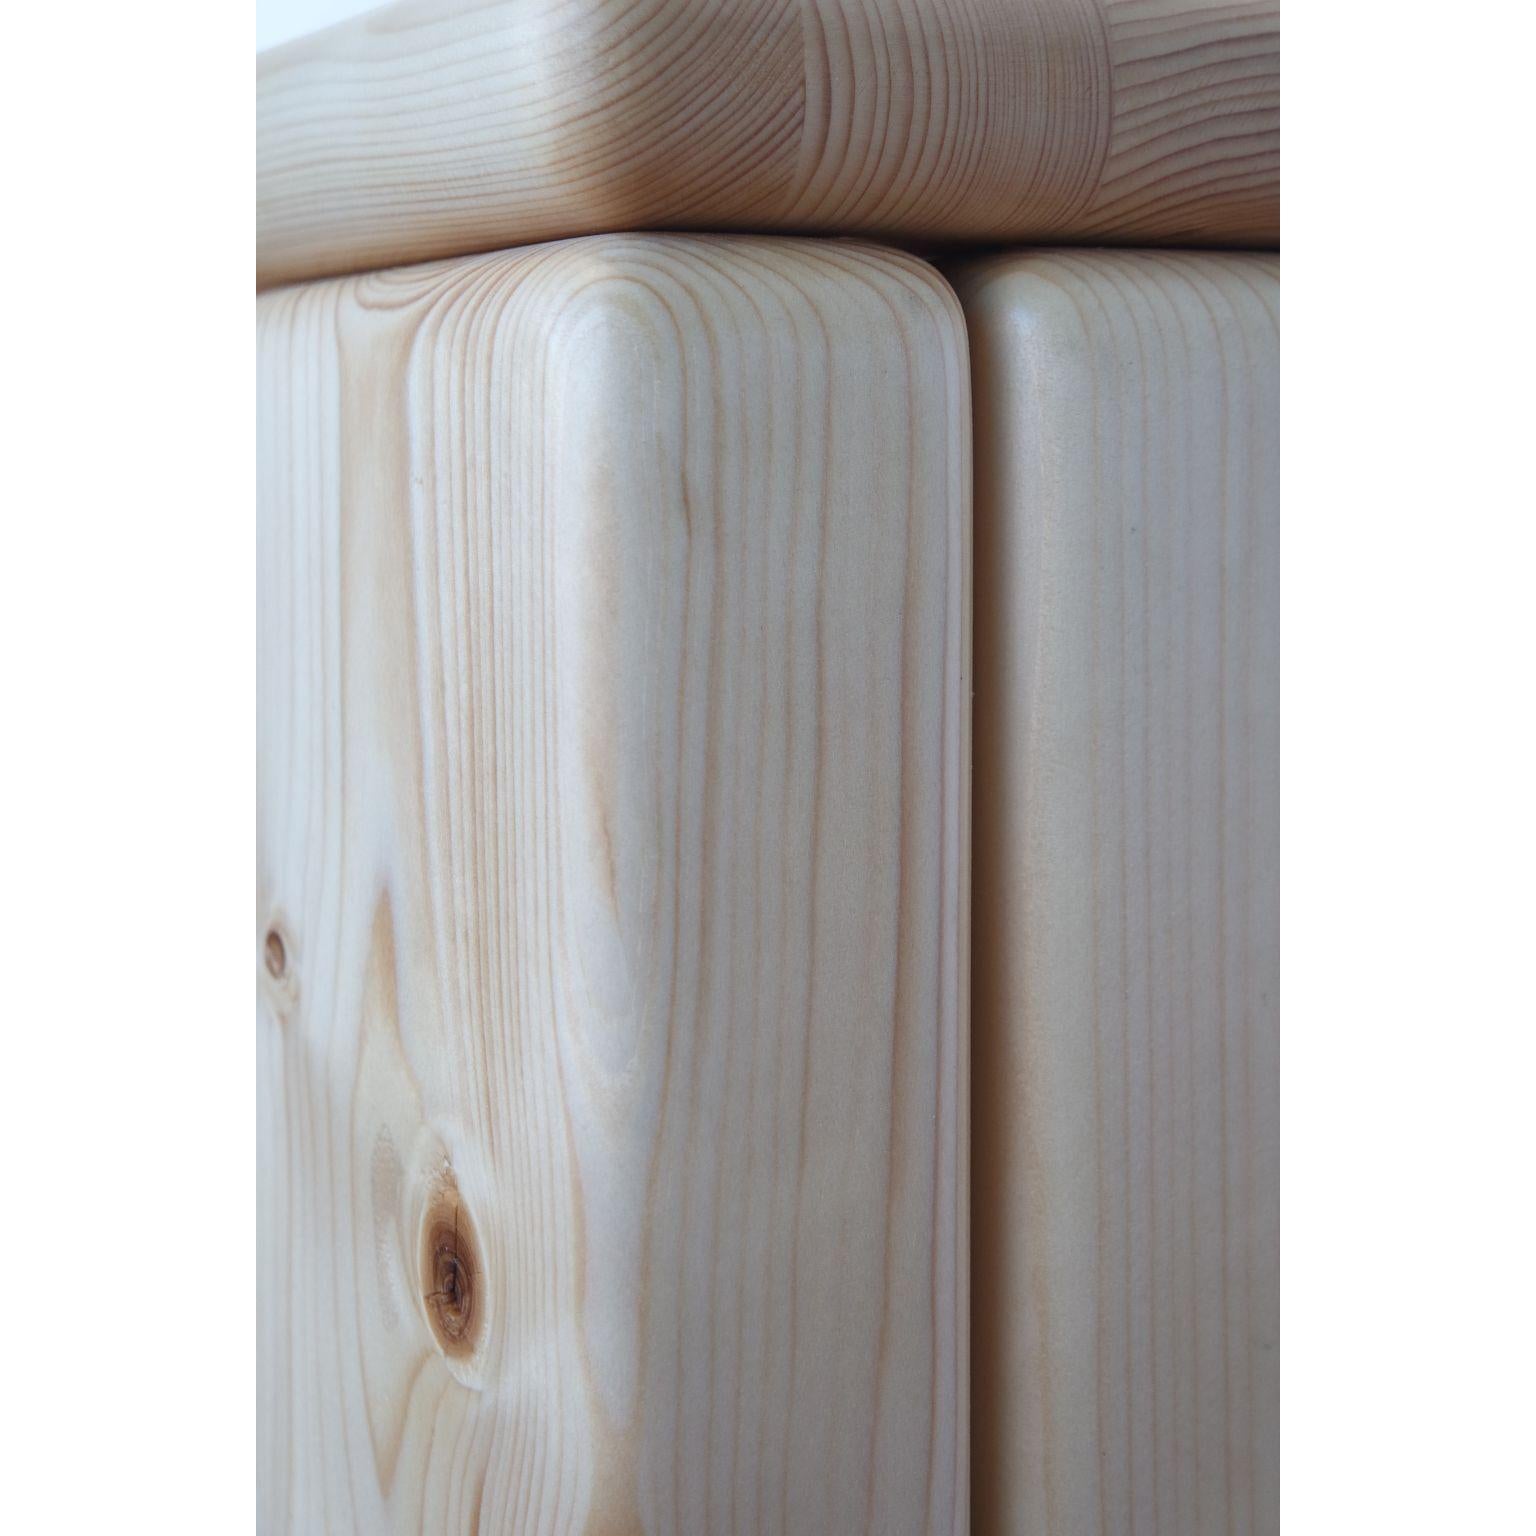 Contemporary Timber Stool Uncolored Wood by Onno Adriaanse For Sale